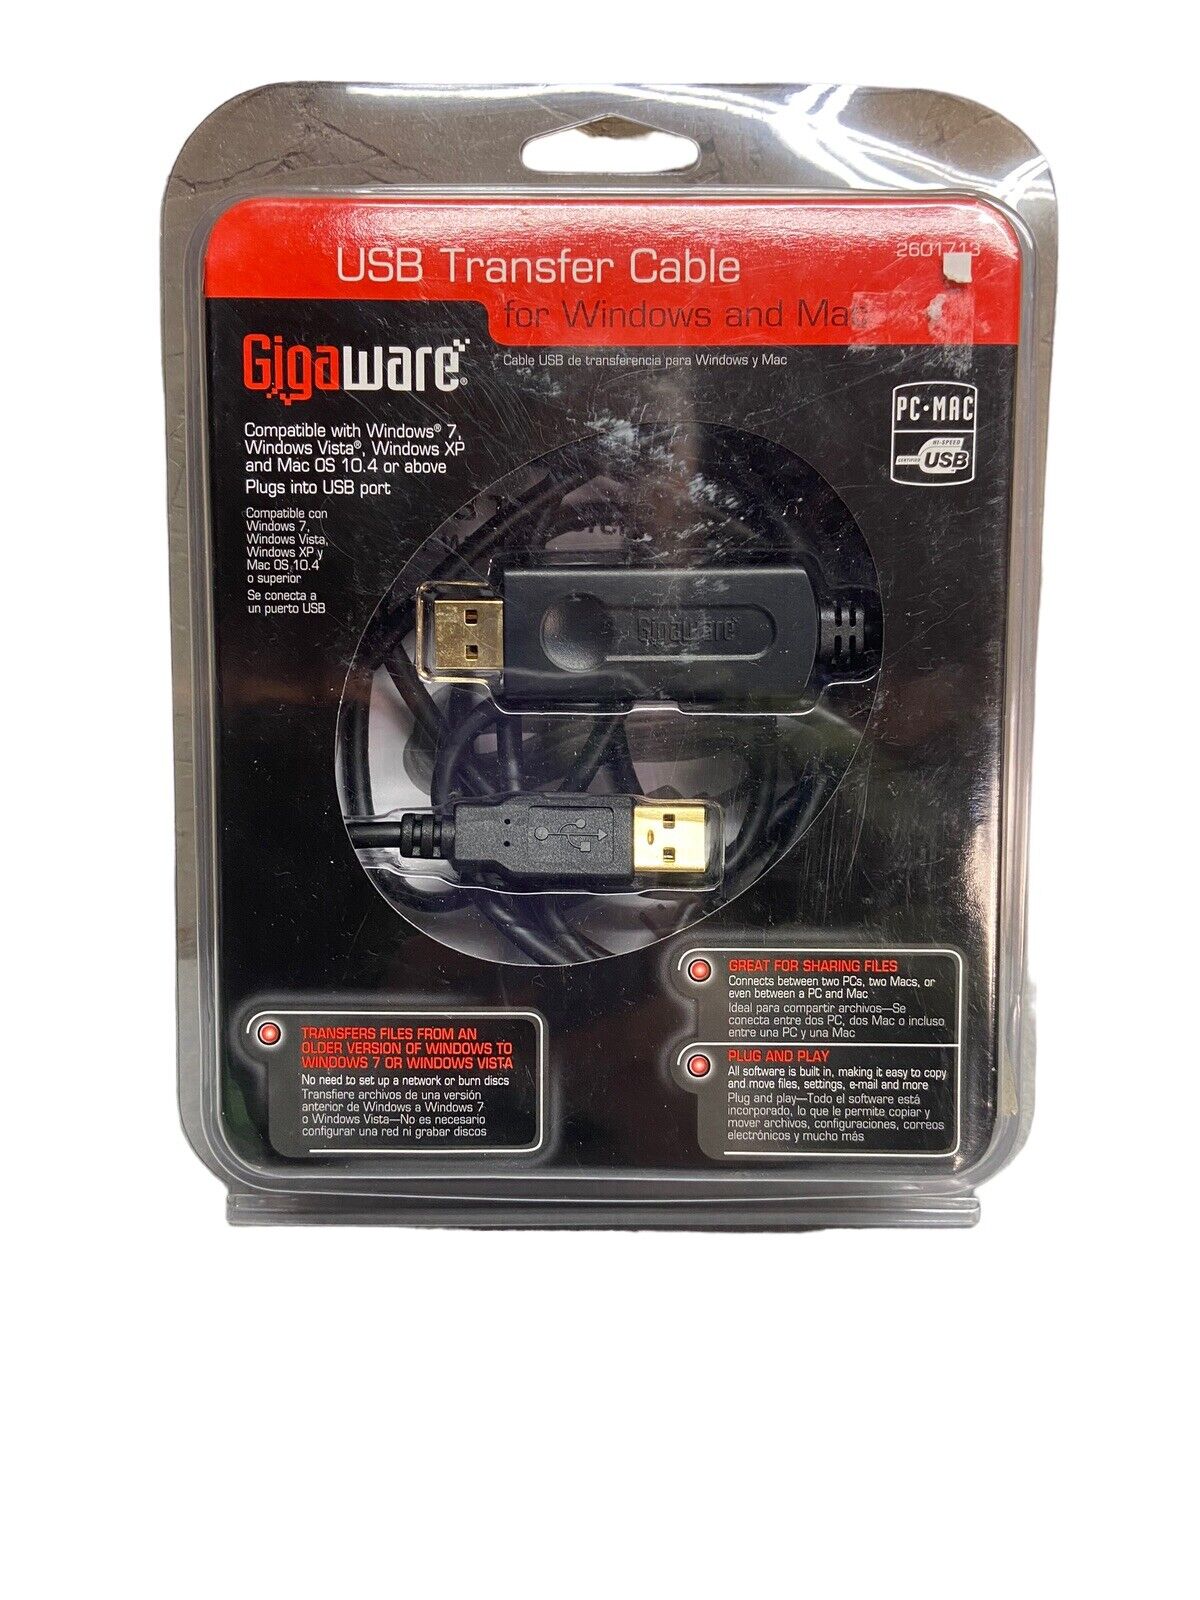 USB TRANSFER CABLE GIGA WARE NEW IN PACKAGE FOR WINDOWS AND MAC